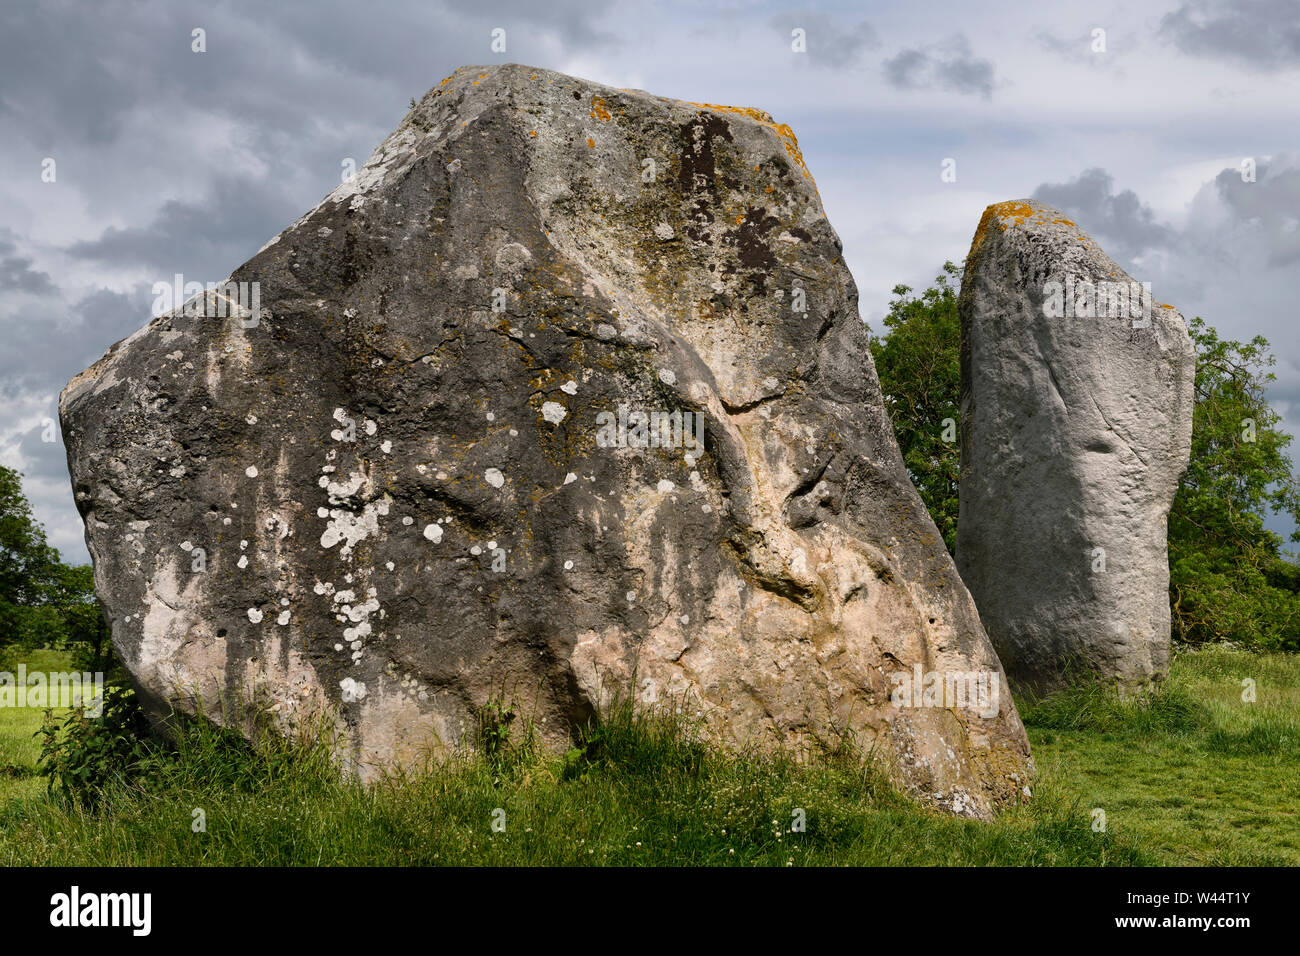 Large female and tall male Cove stones in the northern inner circle of Avebury Henge largest neolithic stone circe in the world Avebury Village Englan Stock Photo